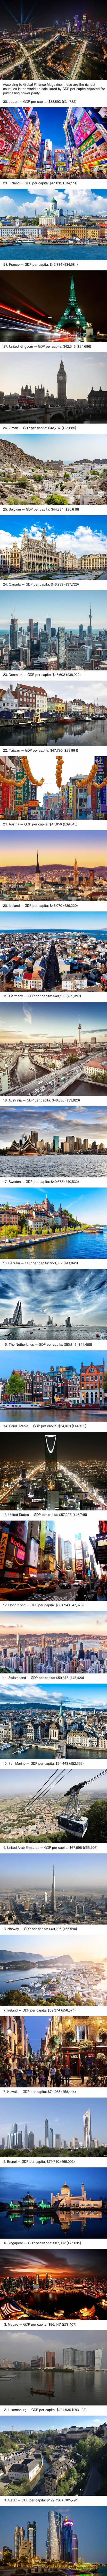 Richest countries in the world in 2017